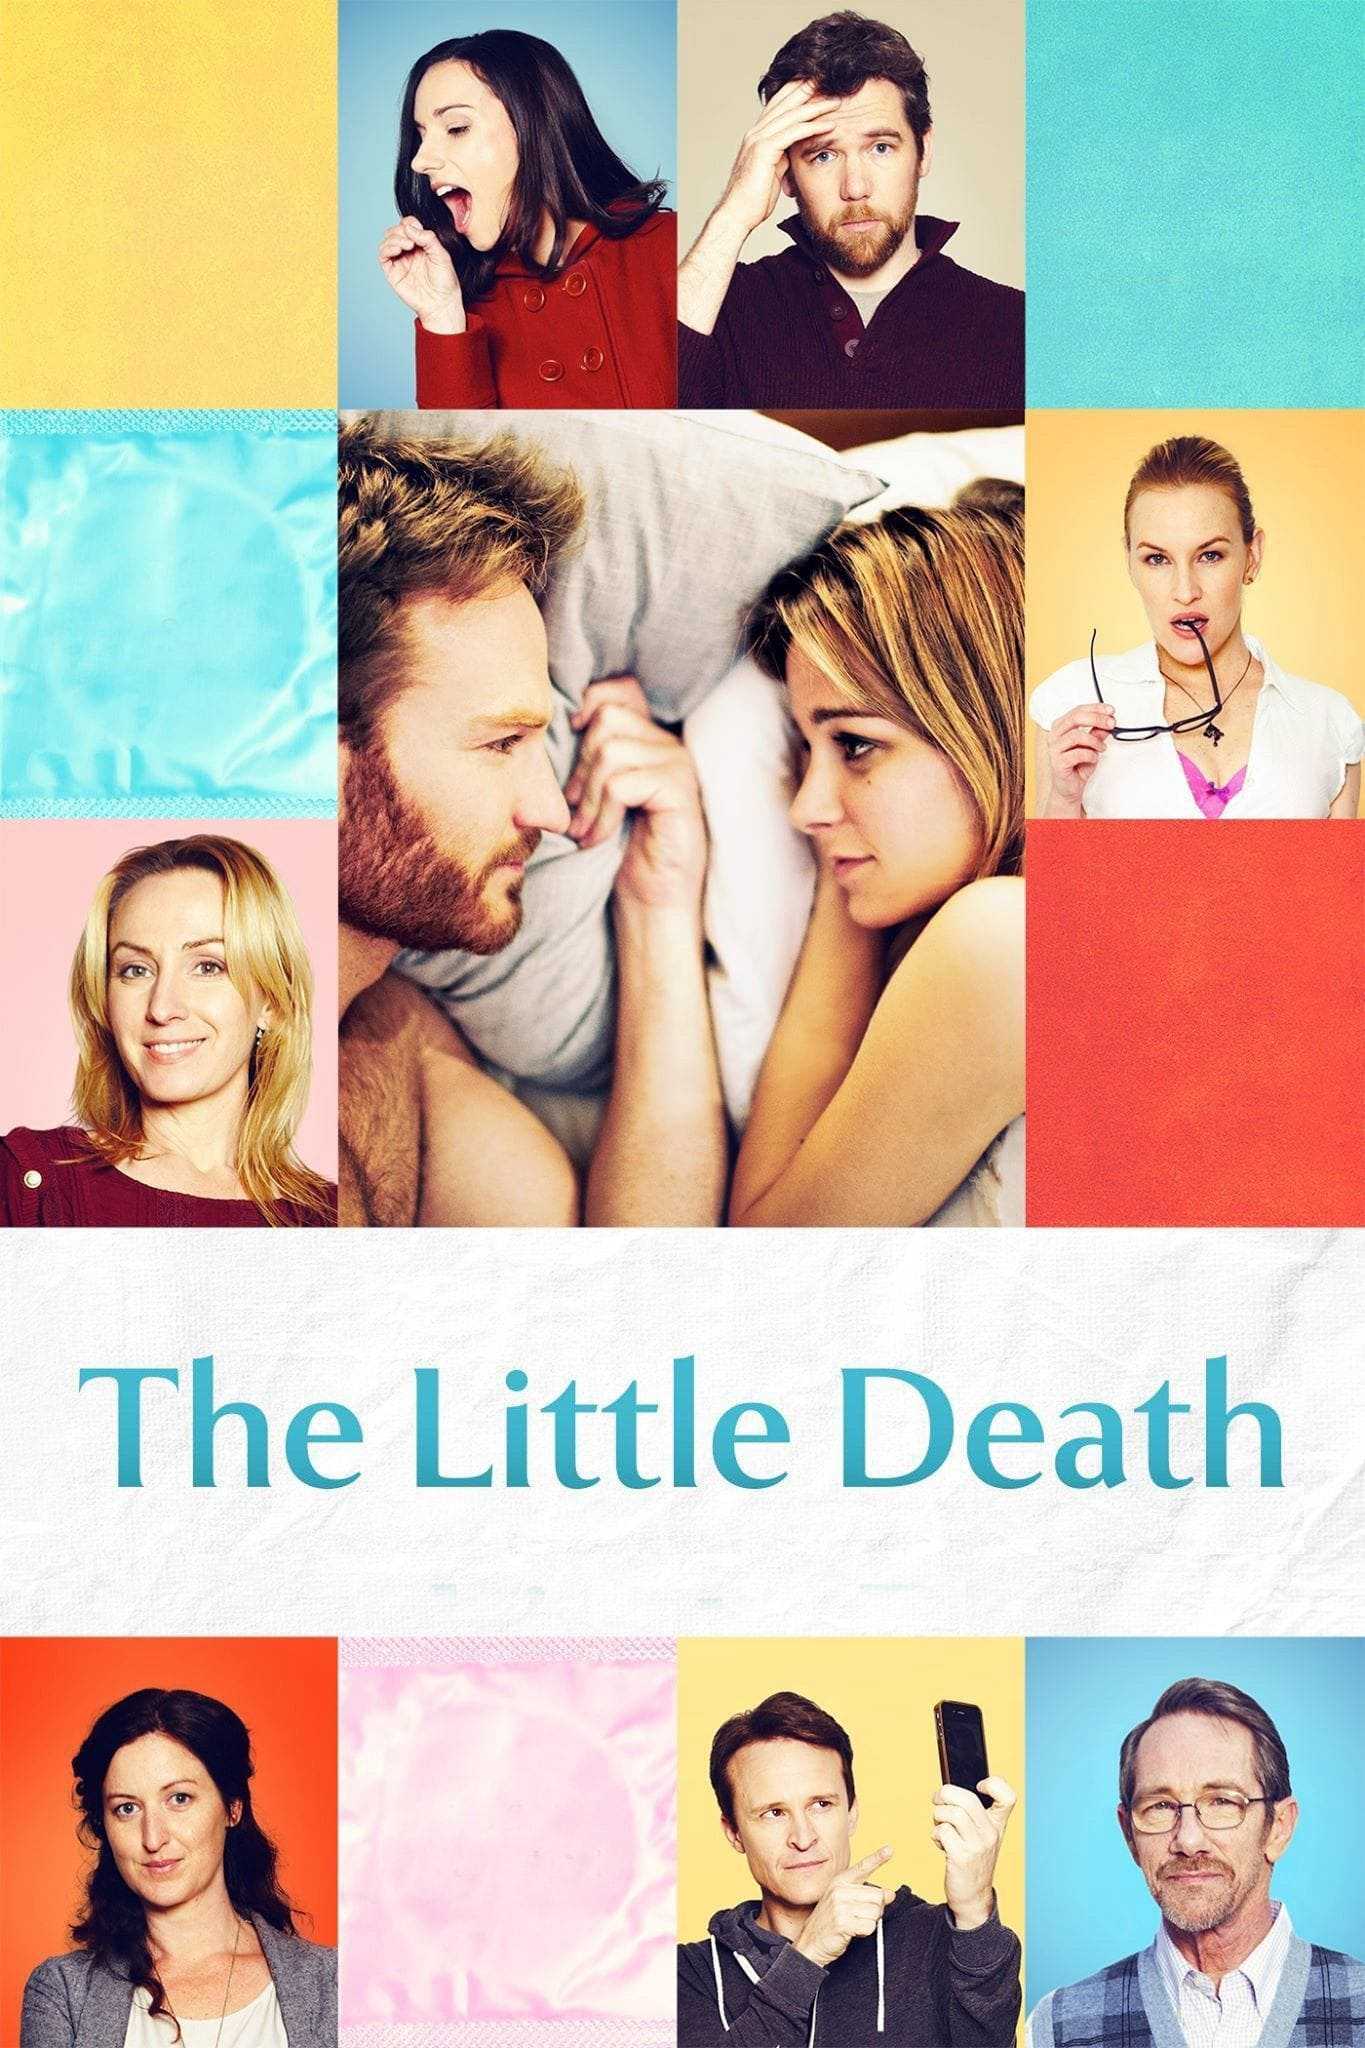 The little death - The little death